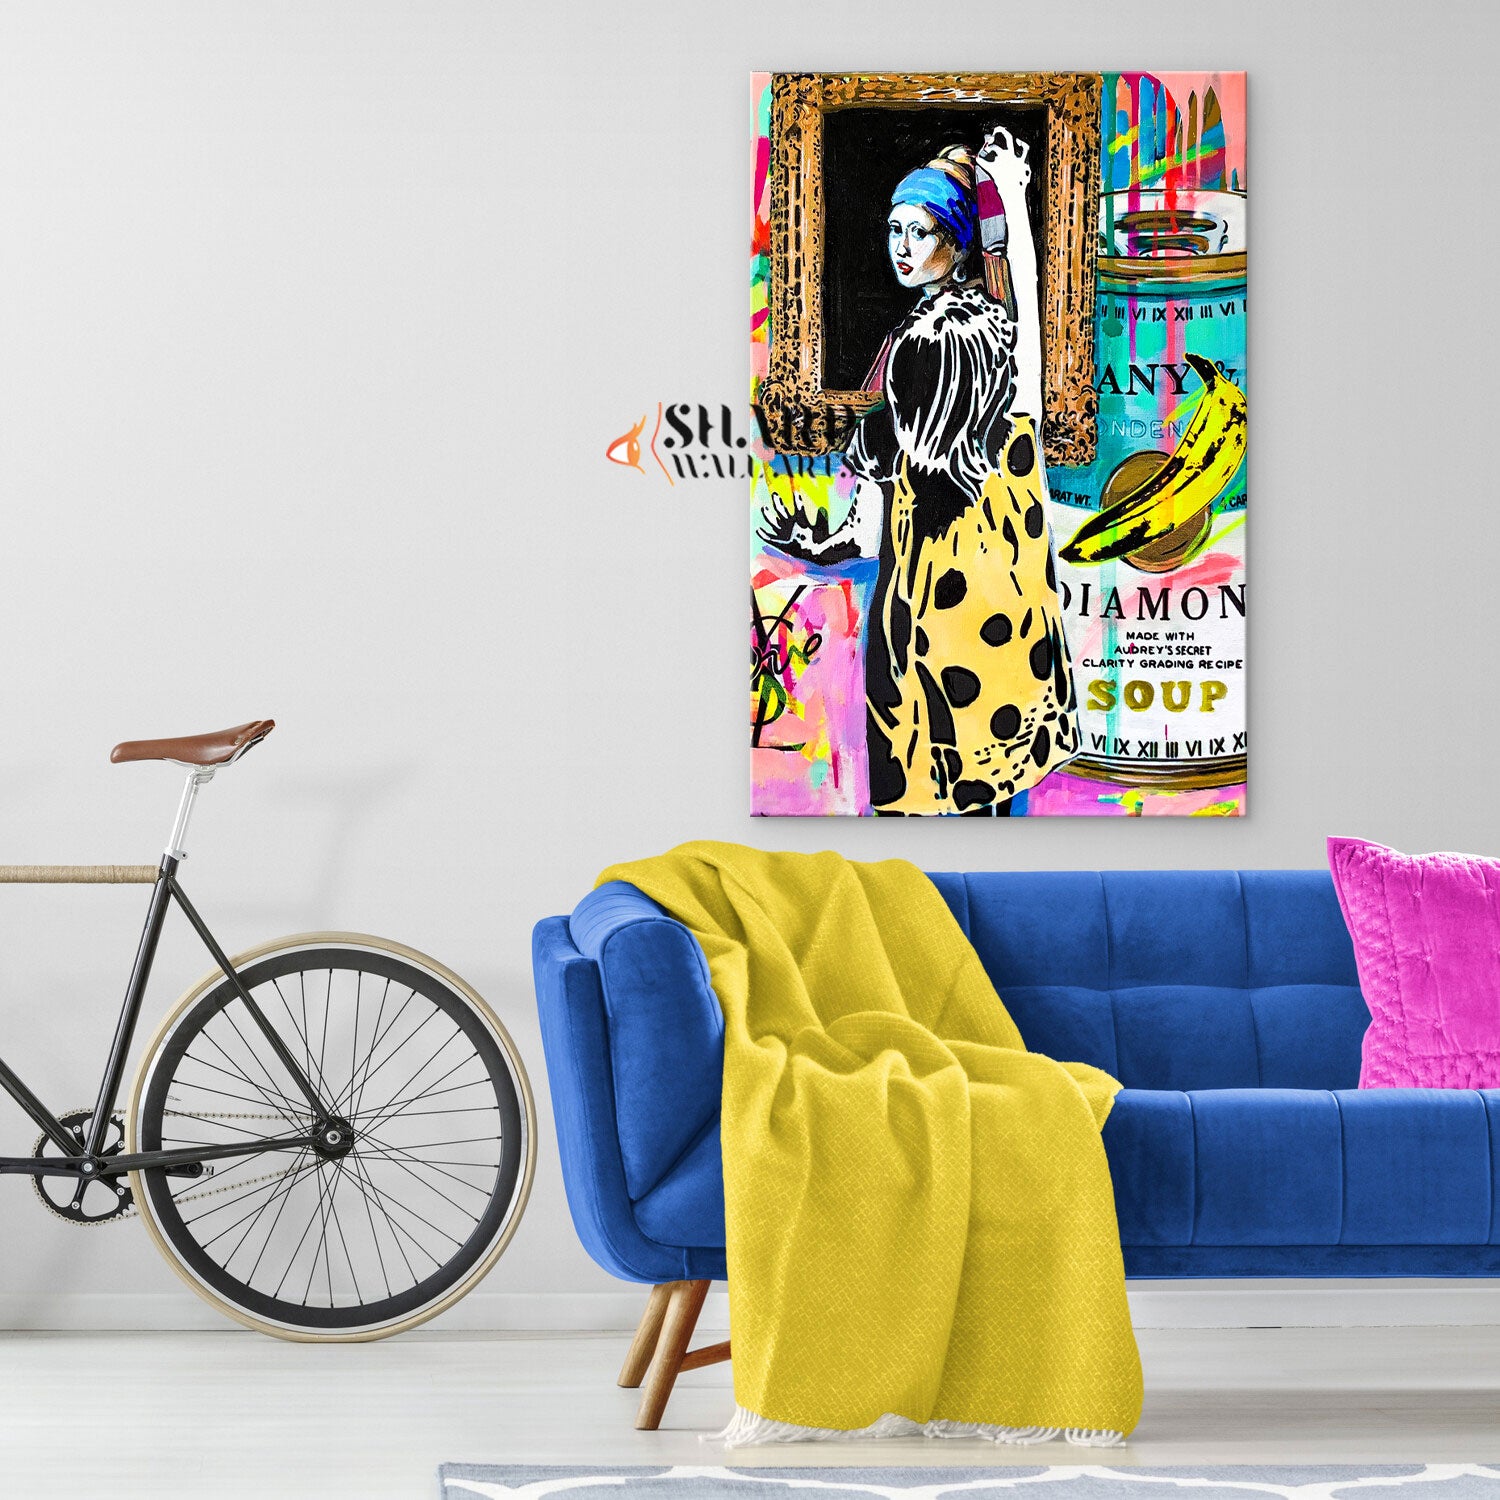 Girl With A Pearl Earring Graffiti Canvas Wall Art